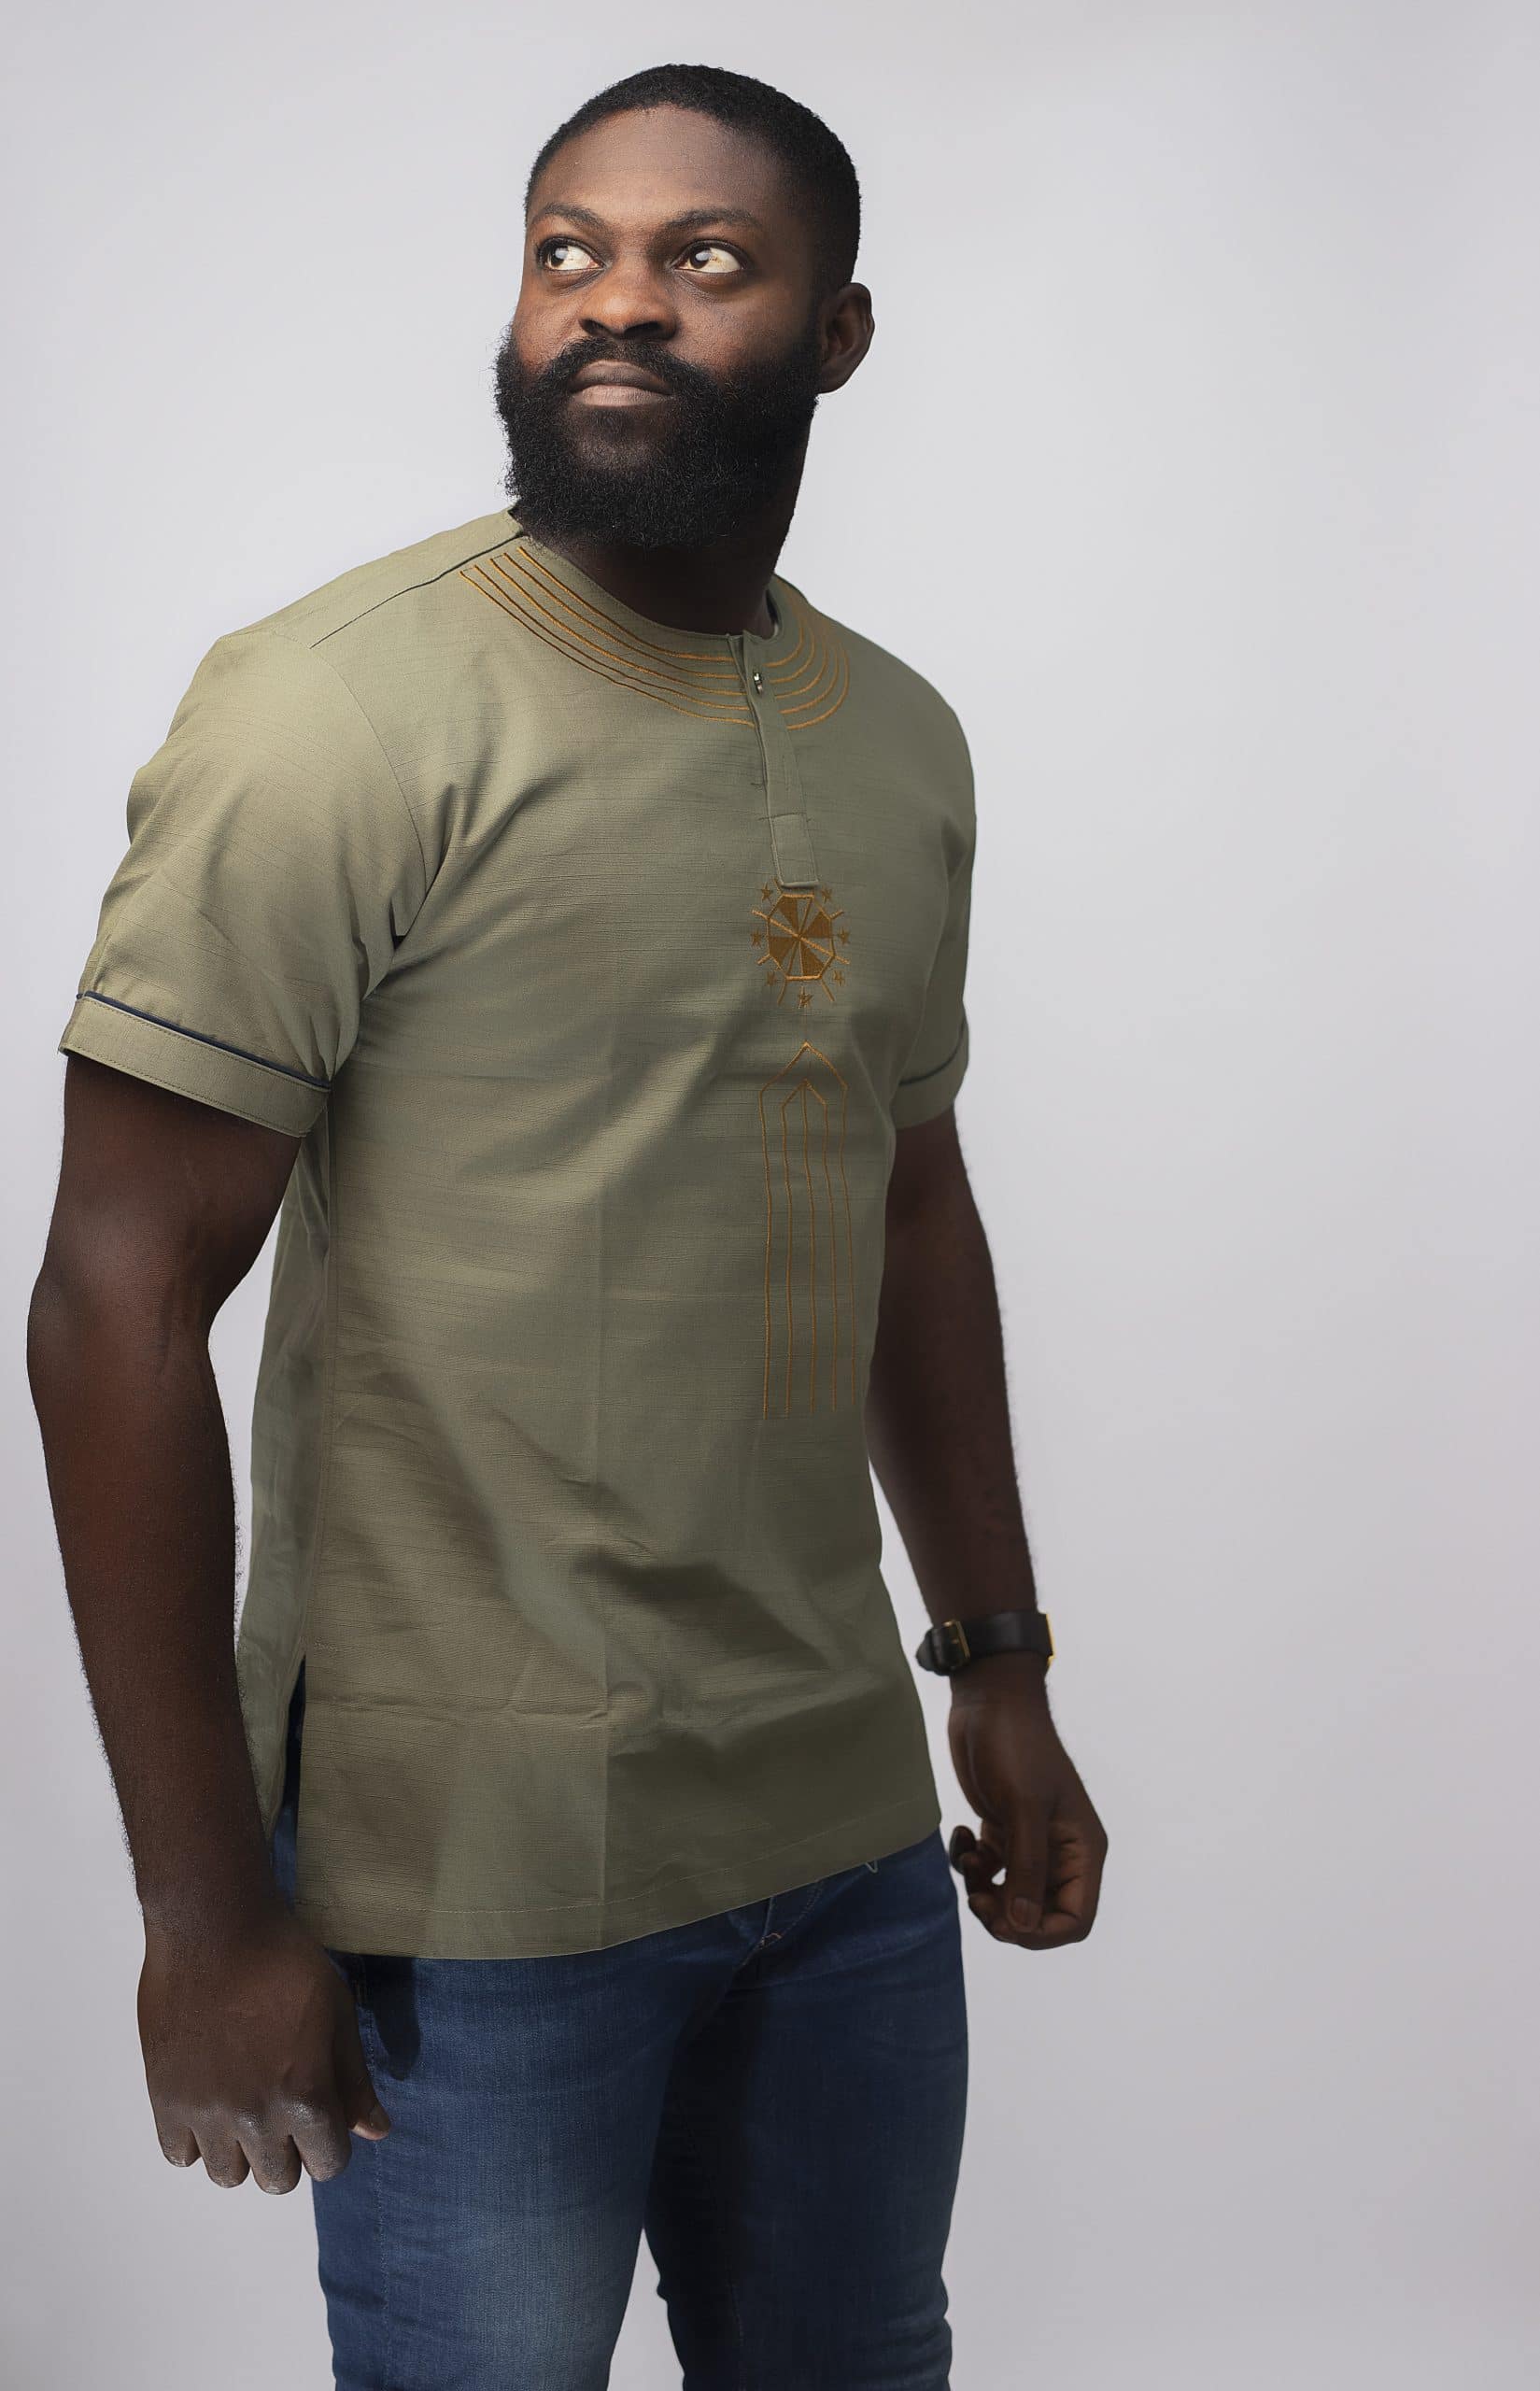 Side shot of model wearing our Momar Slim Fit Embroidered African Shirt in khaki featuring a simple gold embroidery pattern on neckline, chest and black embroidery on the sleeves.